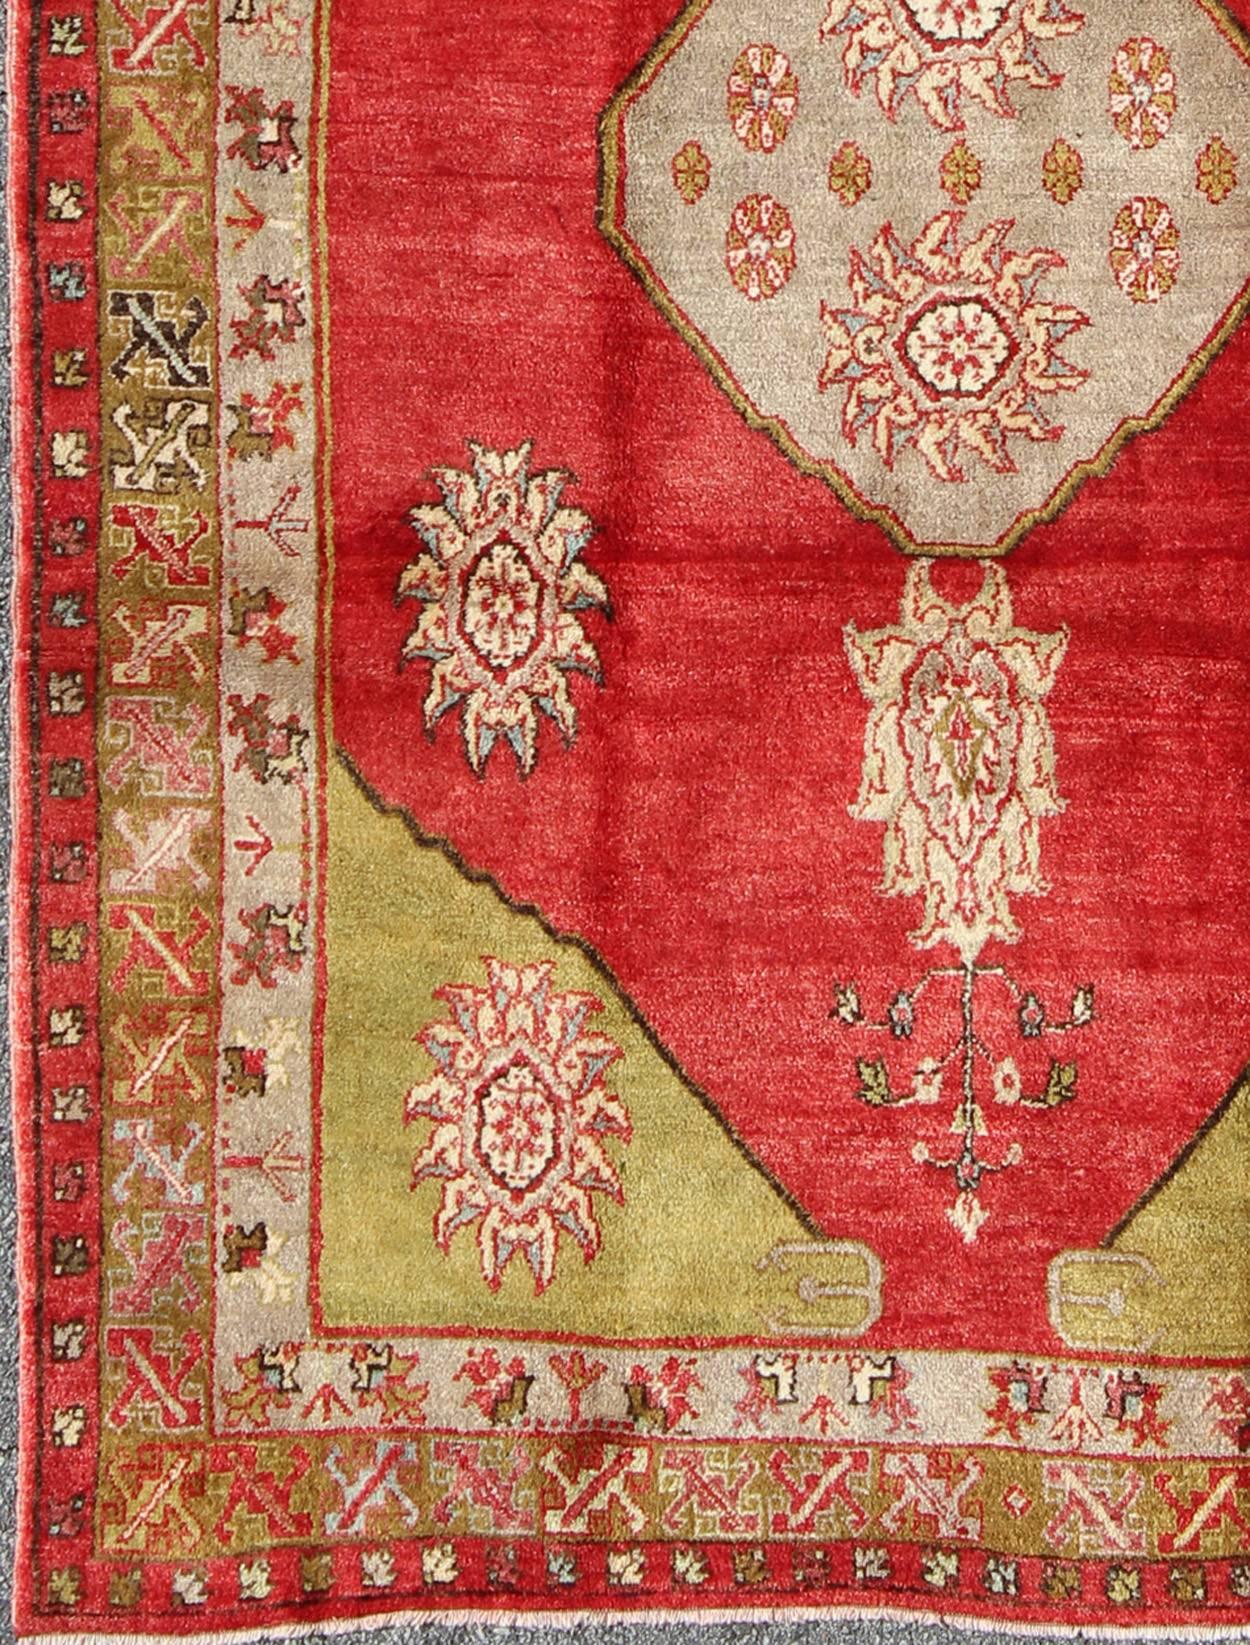  Very Fine Antique Indian Agra Carpet with Raspberry Color and silky Wool and multi colors, accent green.  Keivan Woven Arts / D-1010, circa 1930, Agra carpet. Indian Rug / Early 20th Century.

Measures: 9'10 x 14'4  

This antique Indian Agra rug,